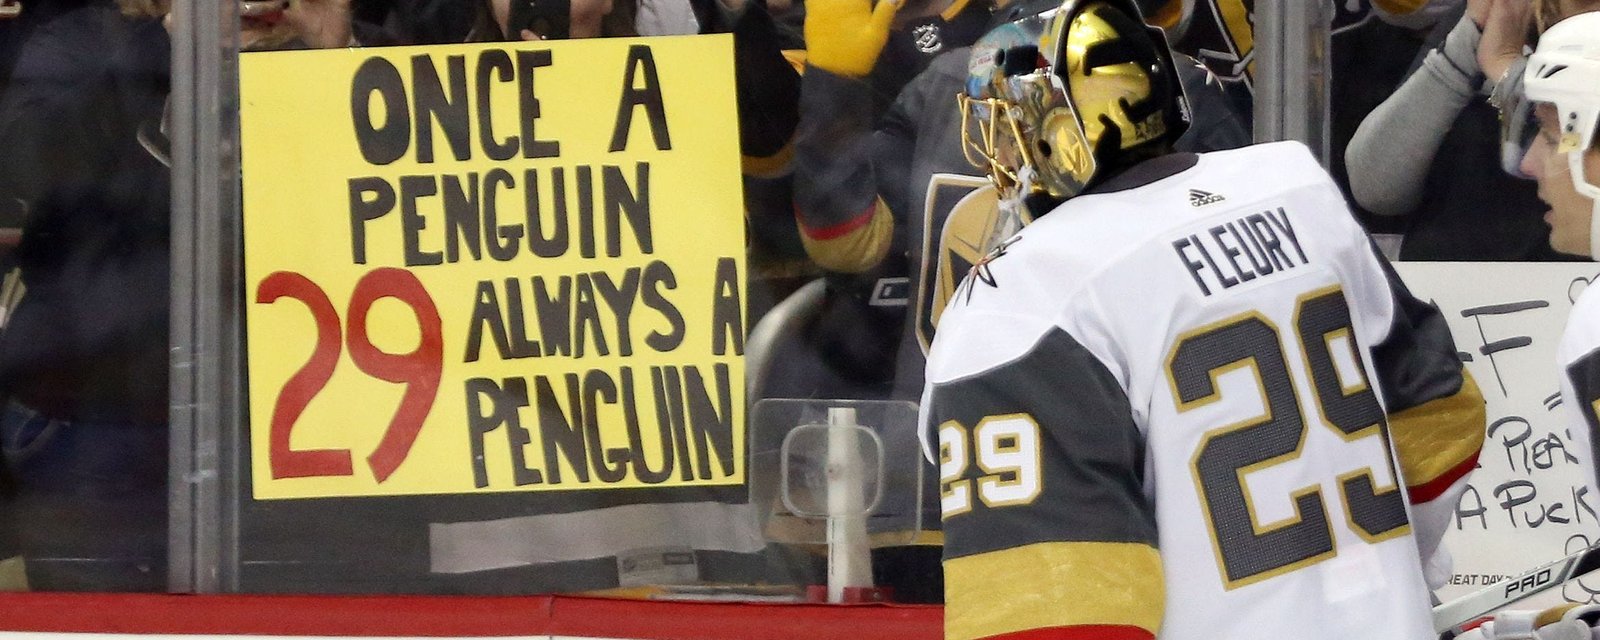 Pens tried incredibly hard to get Fleury back but failed multiple times…